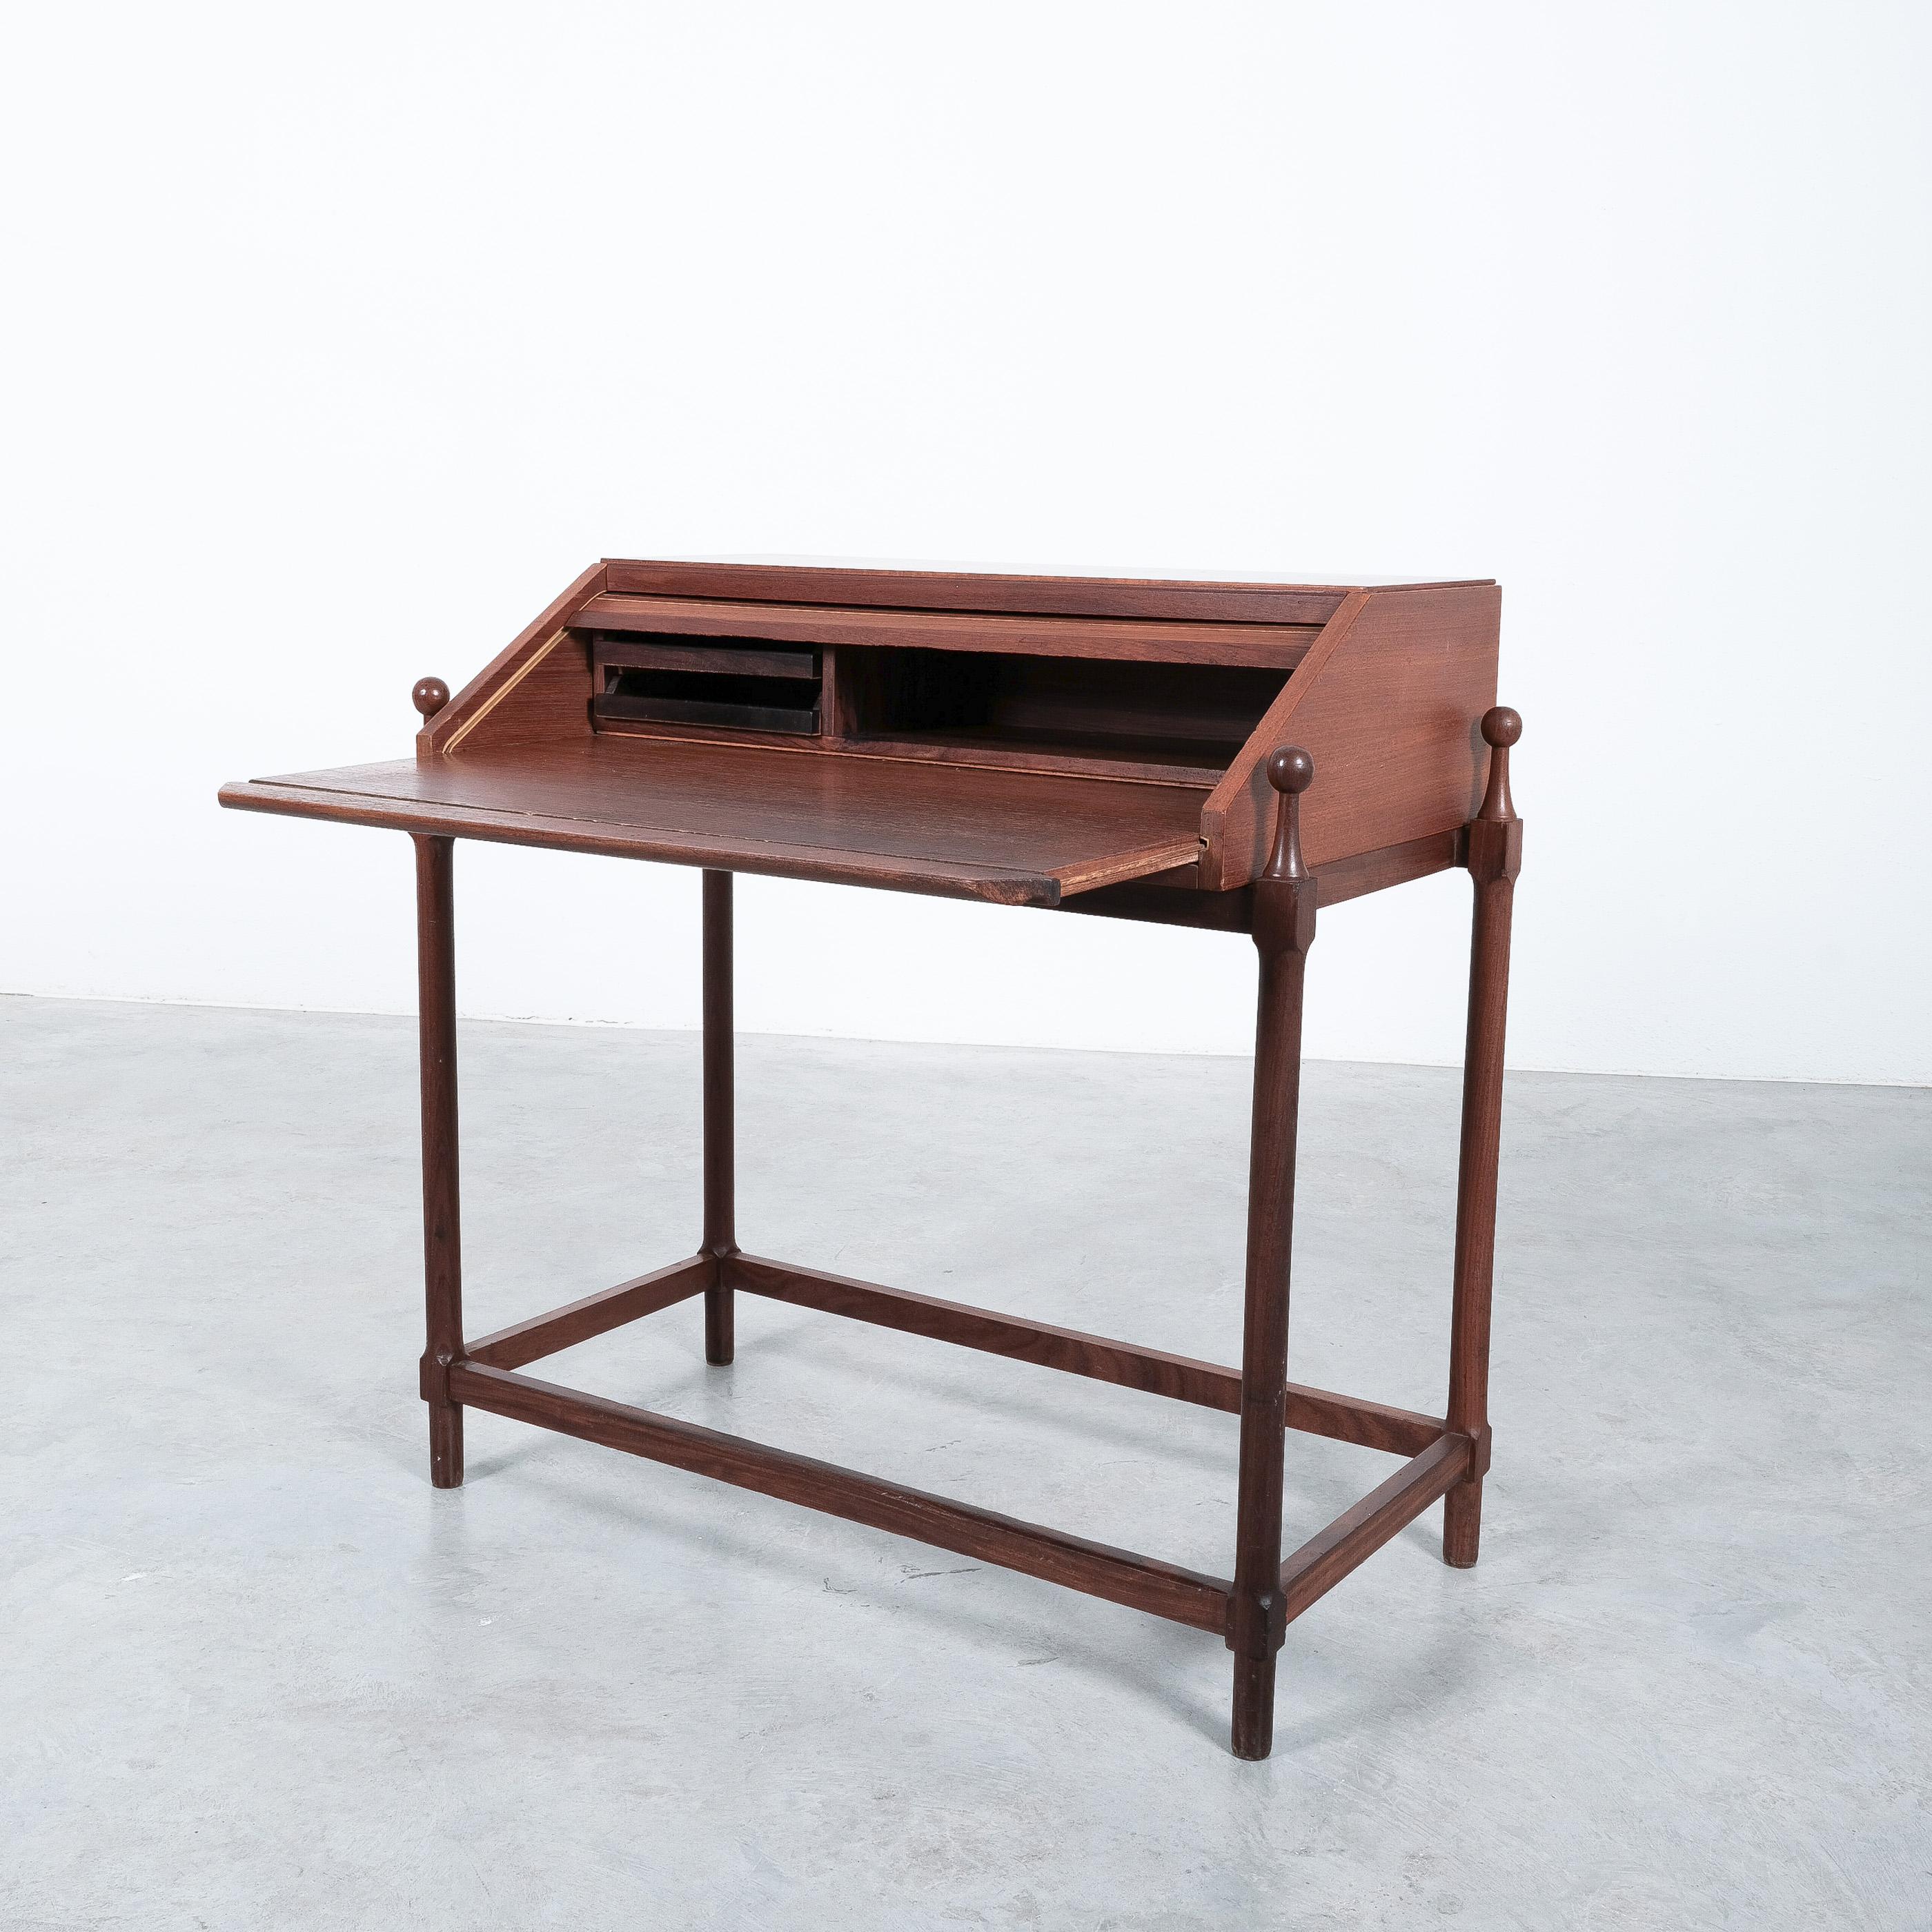 Teak rollup secretary desk by Fratelli Proserpio, Italy 1960's.

Modernist compact writing desk, perfectly sized and in good vintage condition. It shows a unique mechanism that opens as you pull out the writing surface. The interior cabinet has a